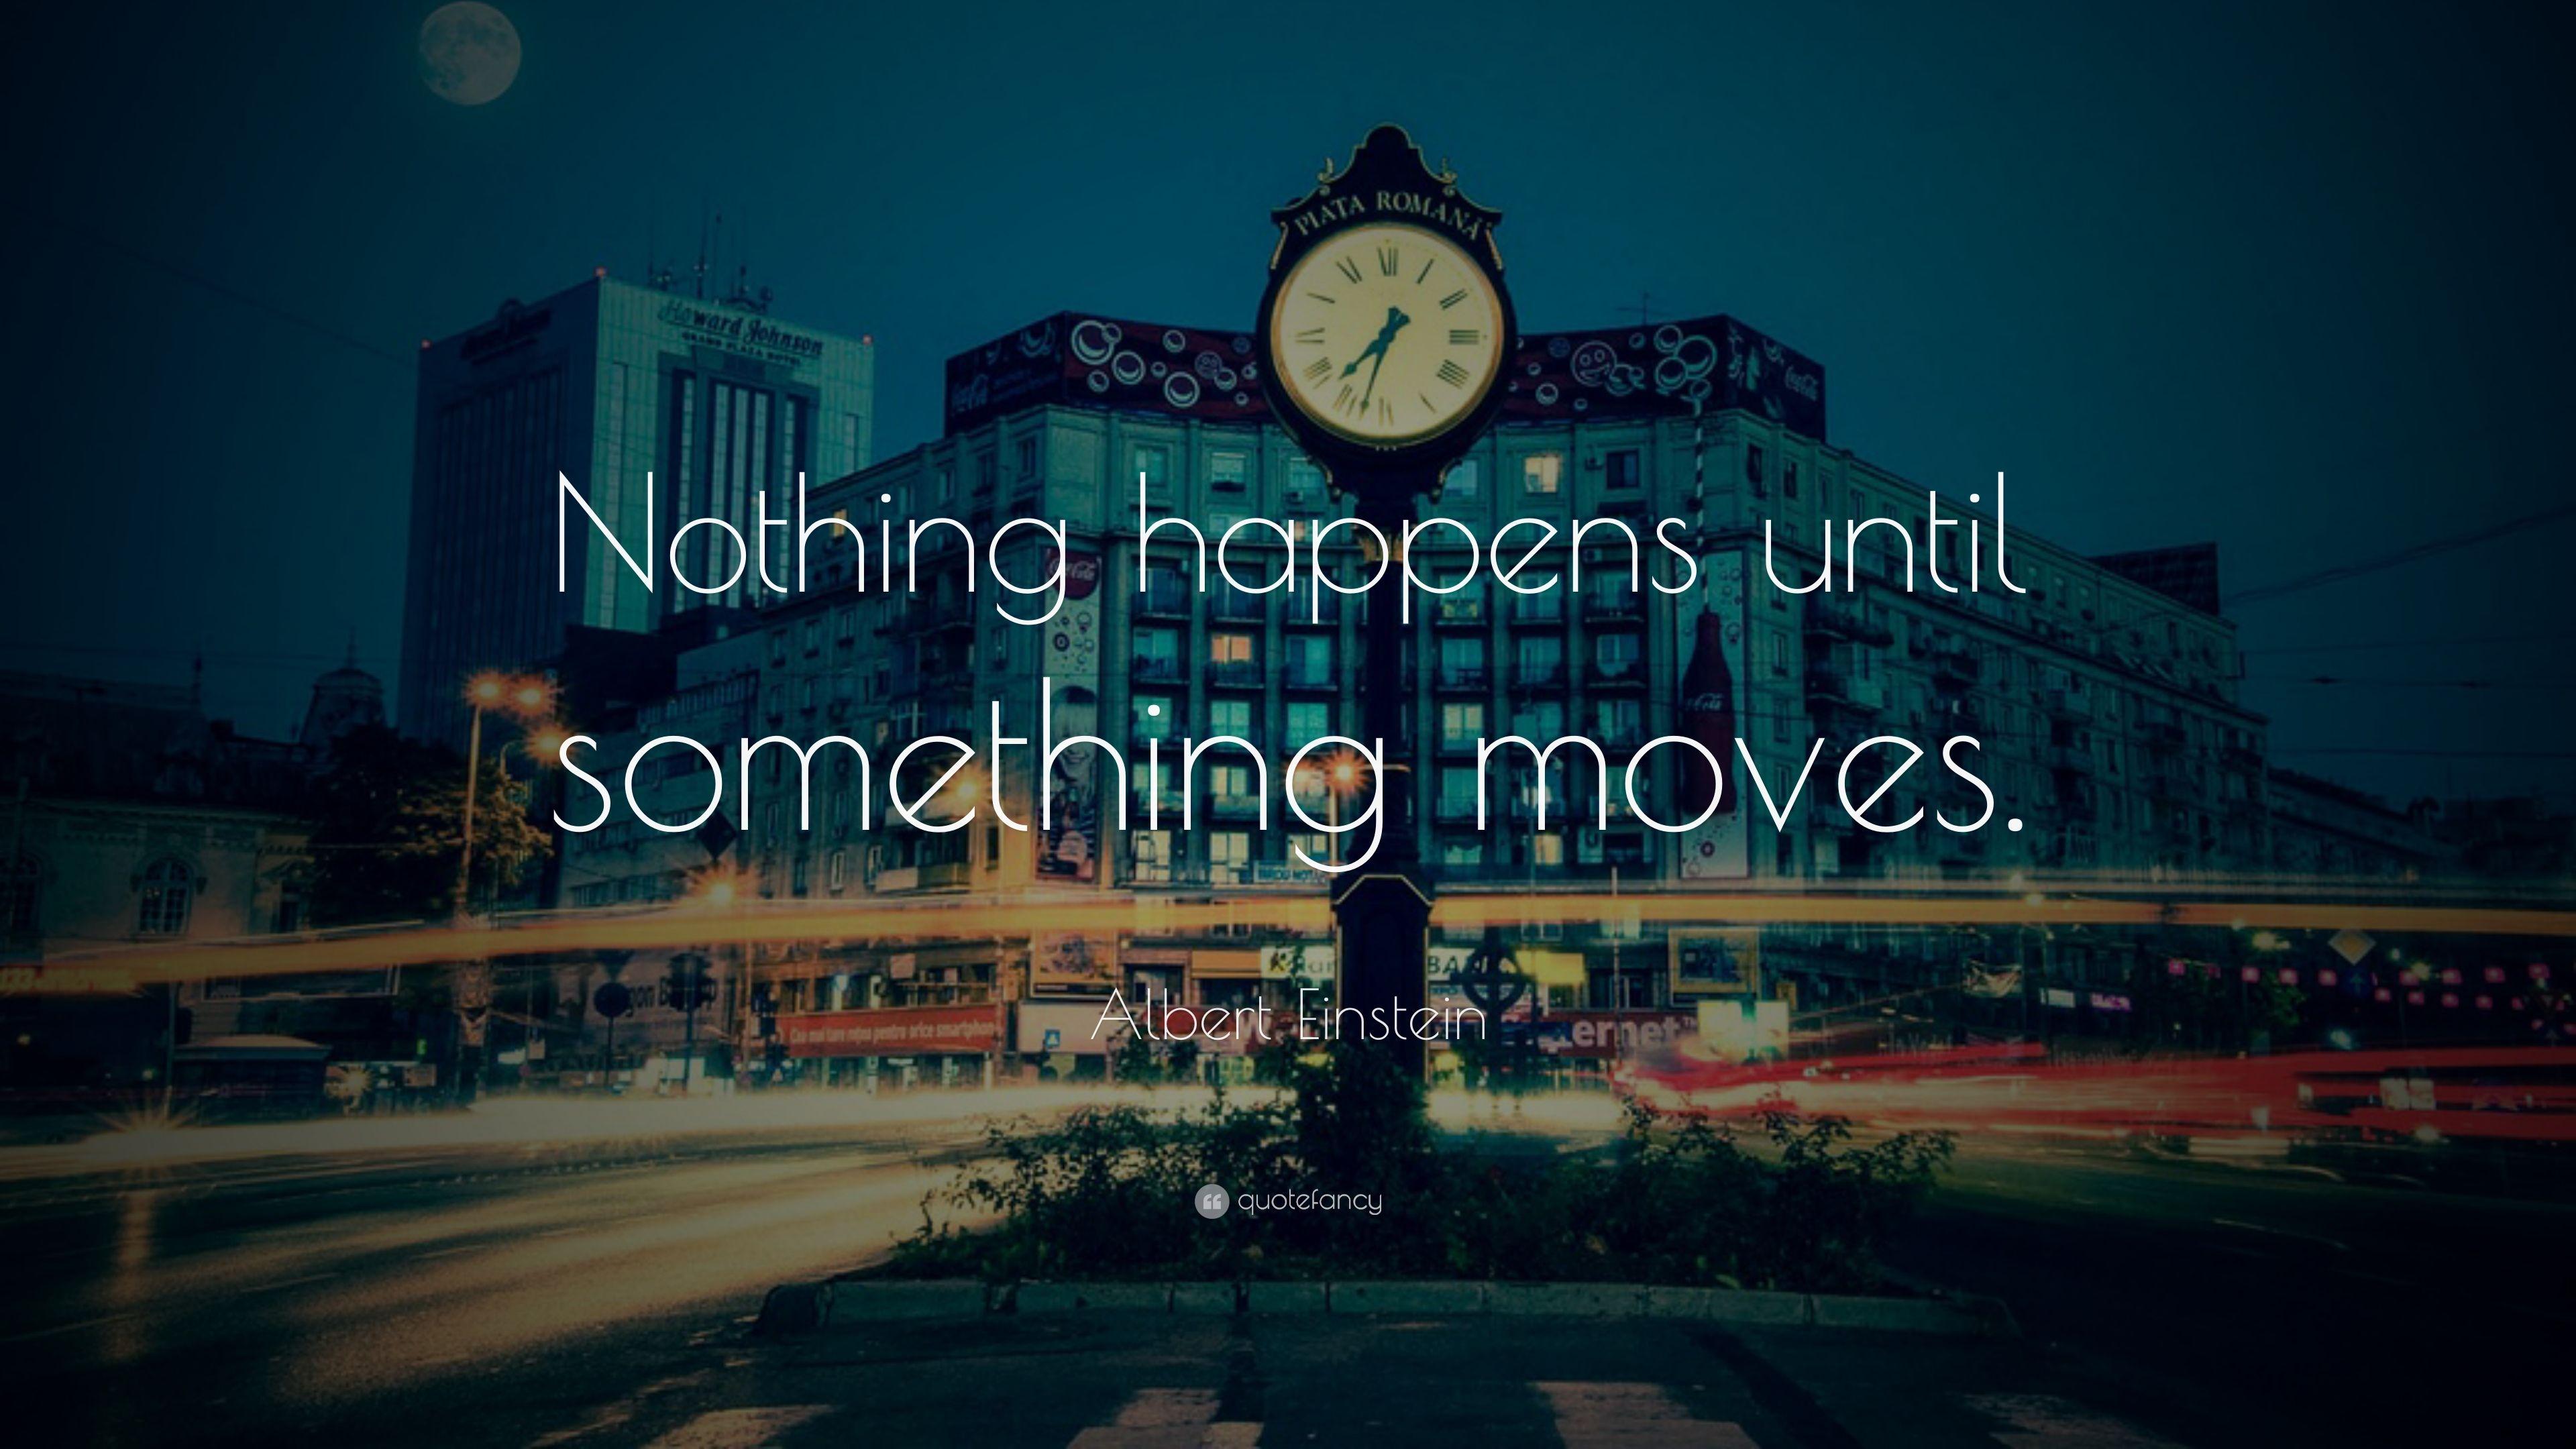 Albert Einstein Quote: “Nothing happens until something moves